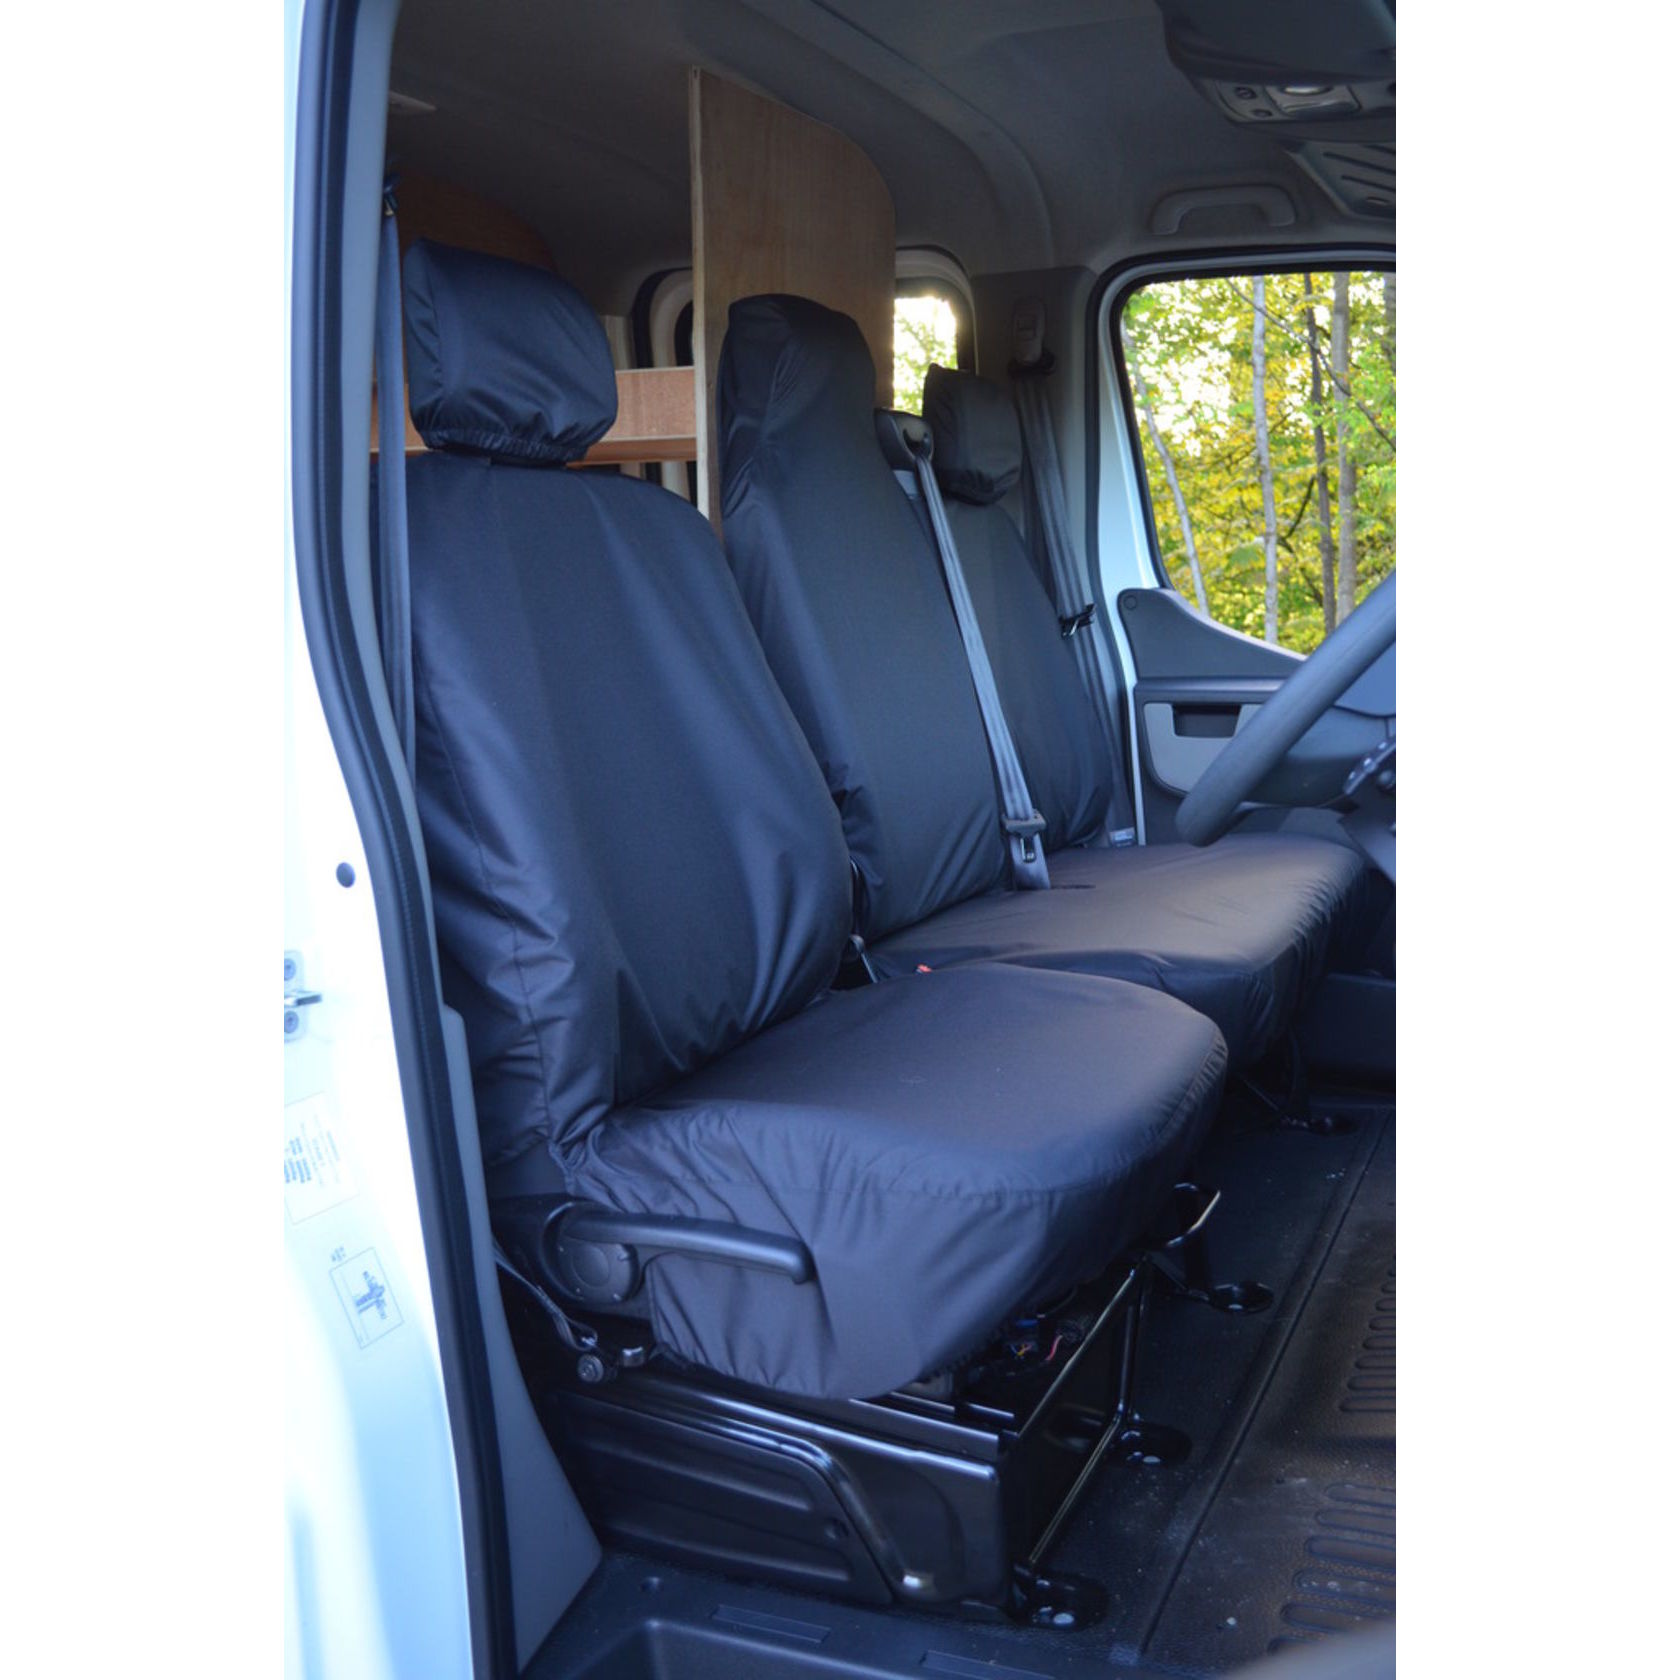 Waterproof Seat Cover Co Semi-Tailored Front 3 Seat Covers Set to fit Renault Master